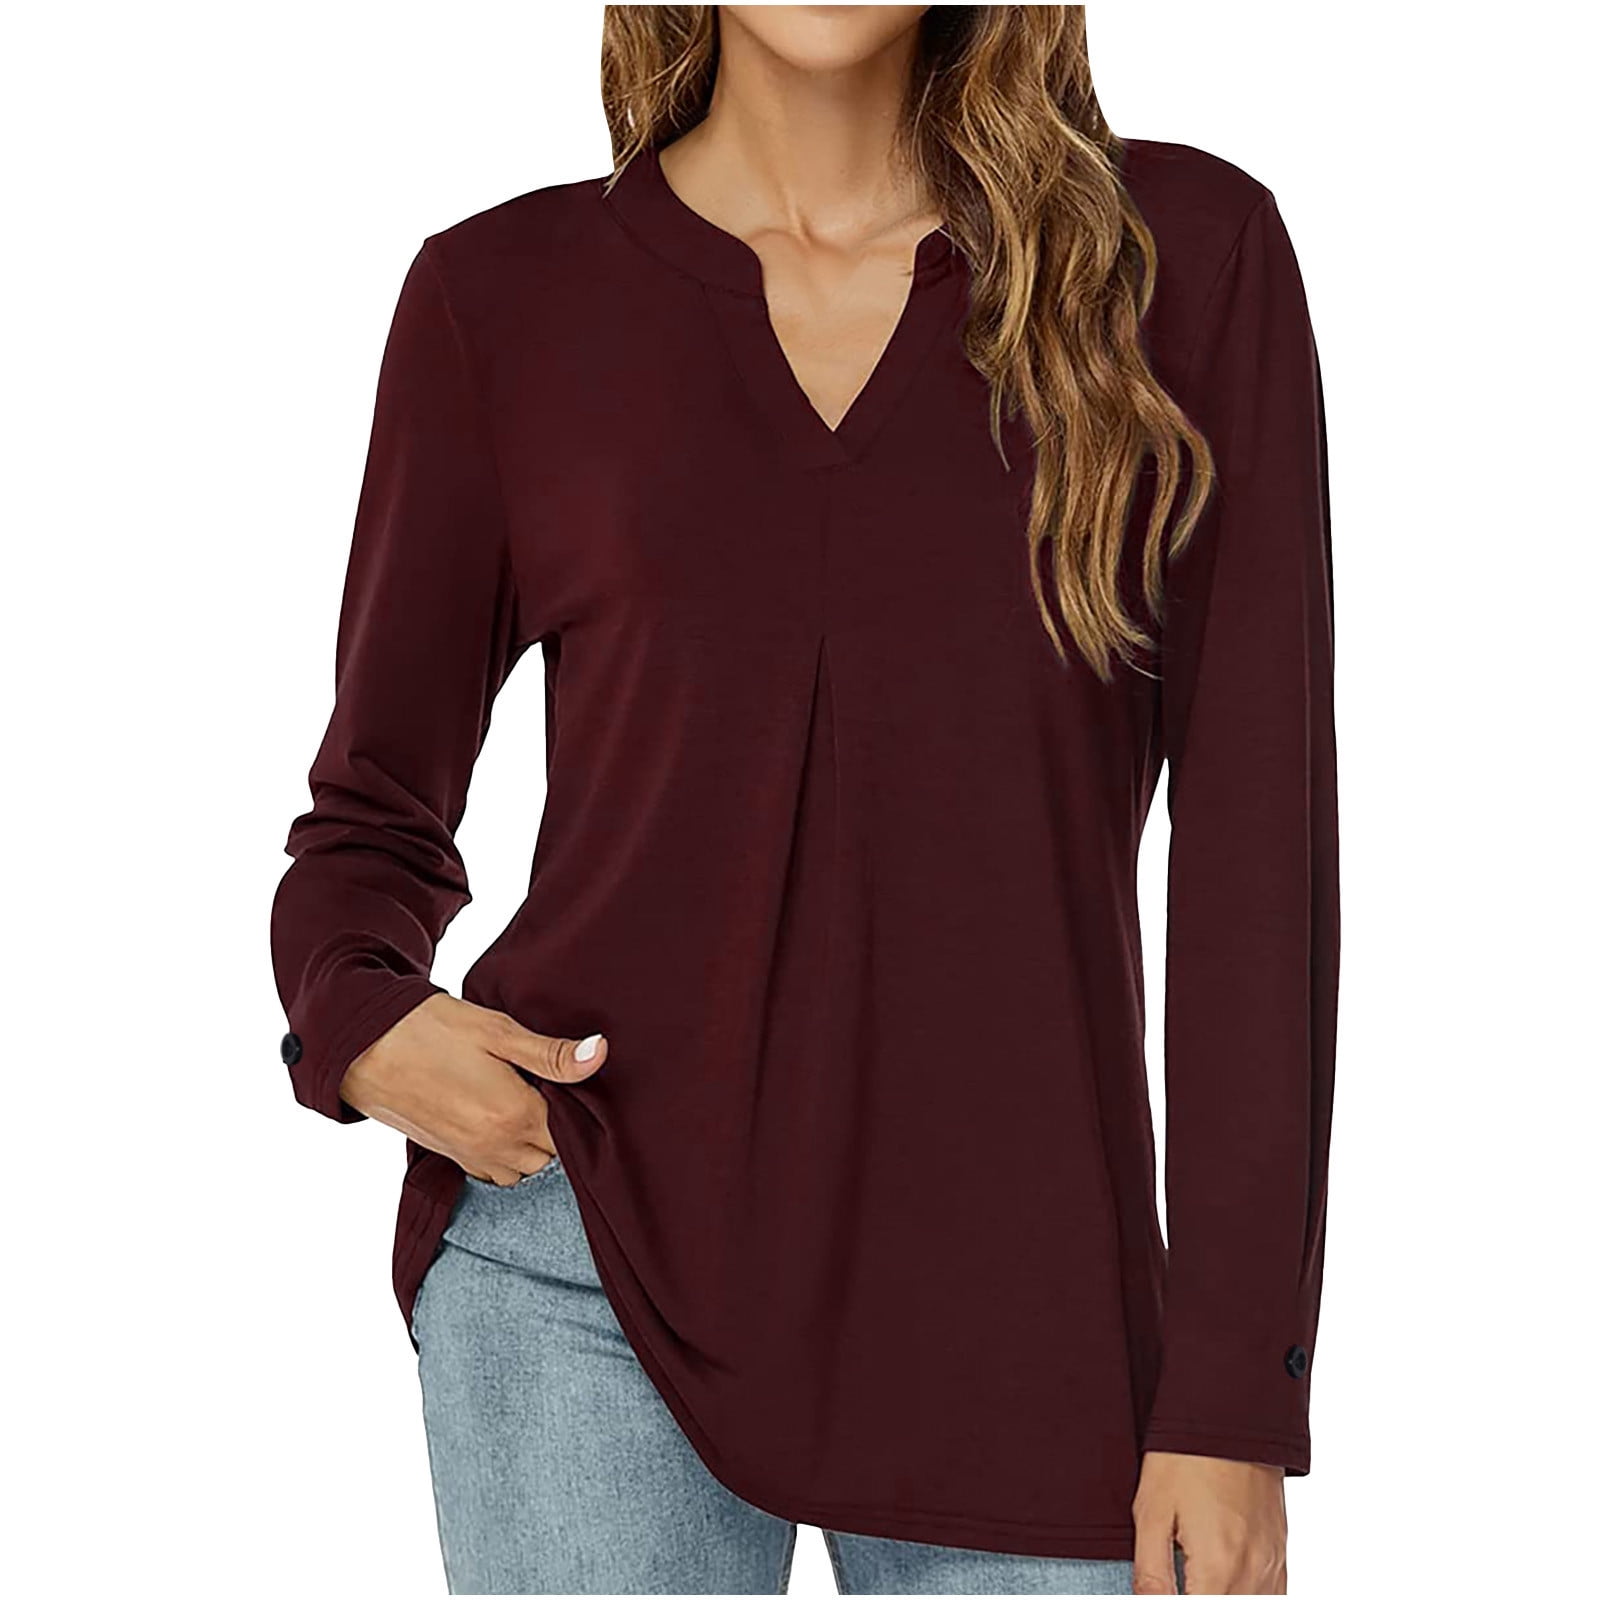 Ladies Autumn and Winter Long Sleeve Solid Color V Neck,Today Show